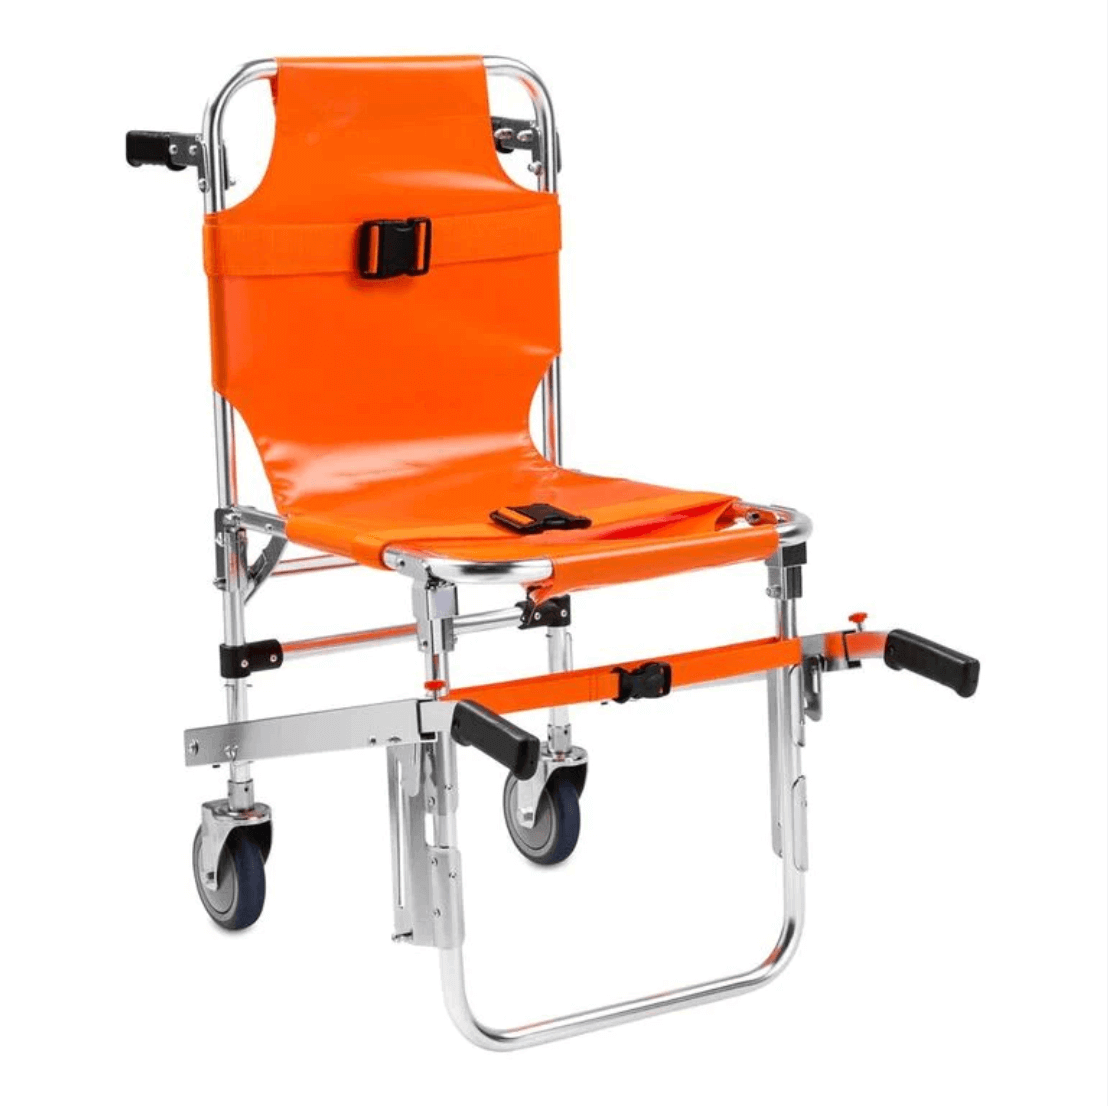 LINE2design Emergency Evacuation 2 Wheel Stair Chair Lift EMS Quick Release Buckle with Patient Restraint Straps & Front-Back Handles